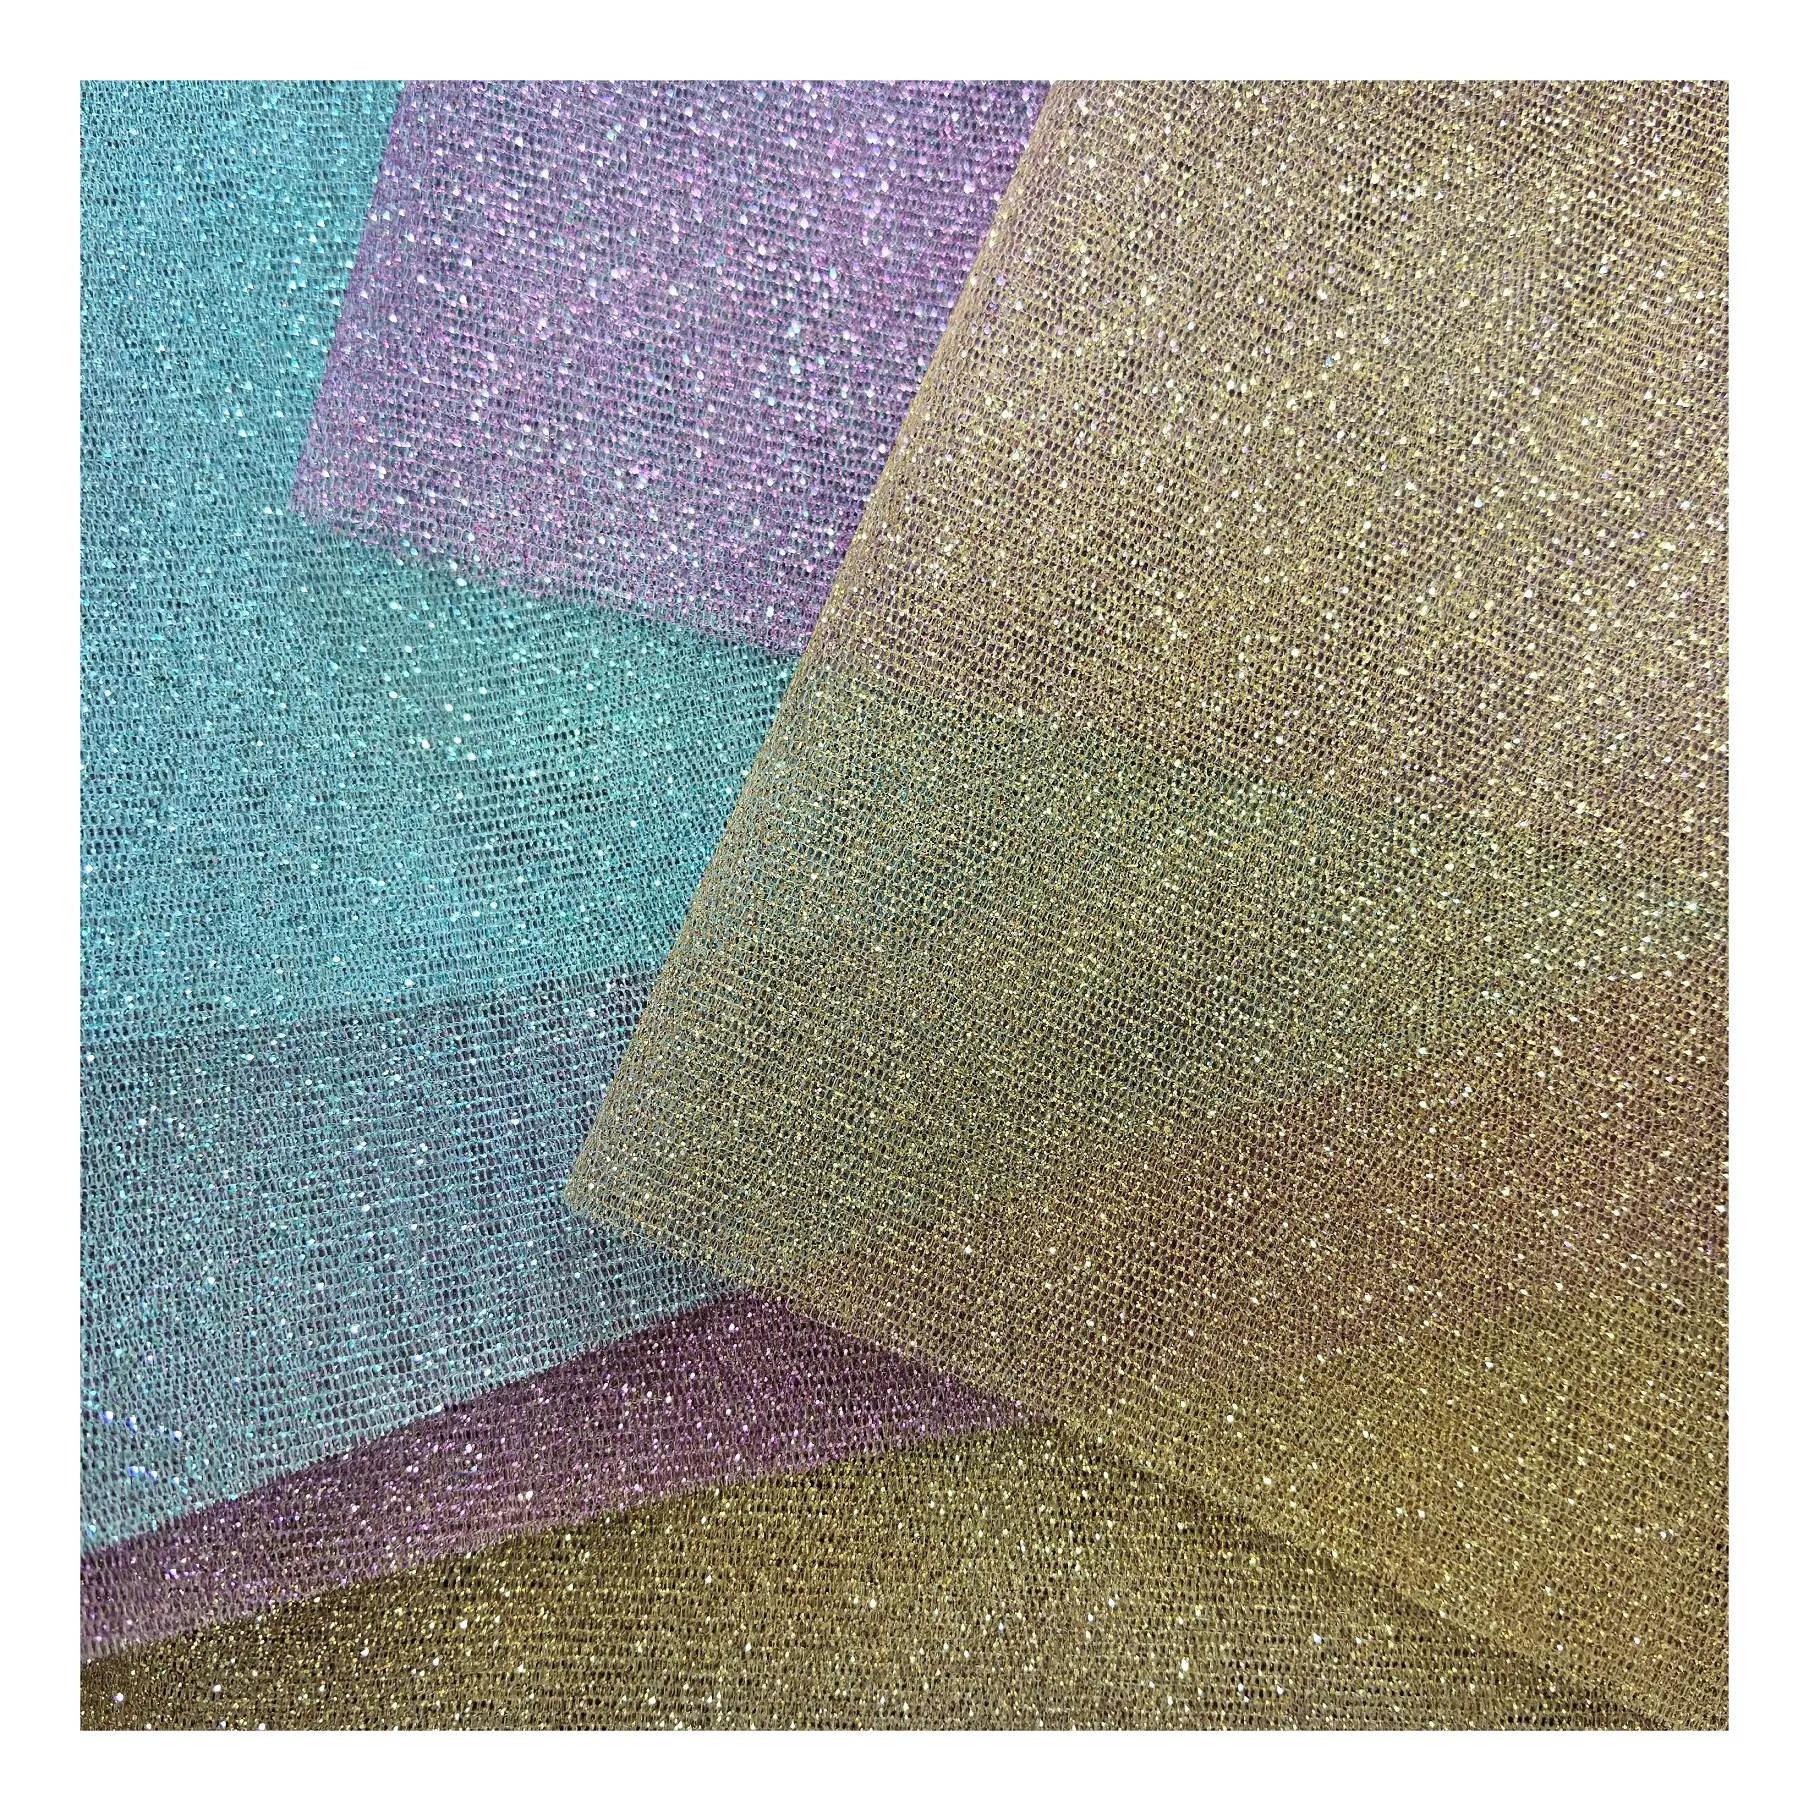 TULLE GLITTER BRILLO FABRIC FOR WEDDING DRESS PARTY DRESS DECORATION